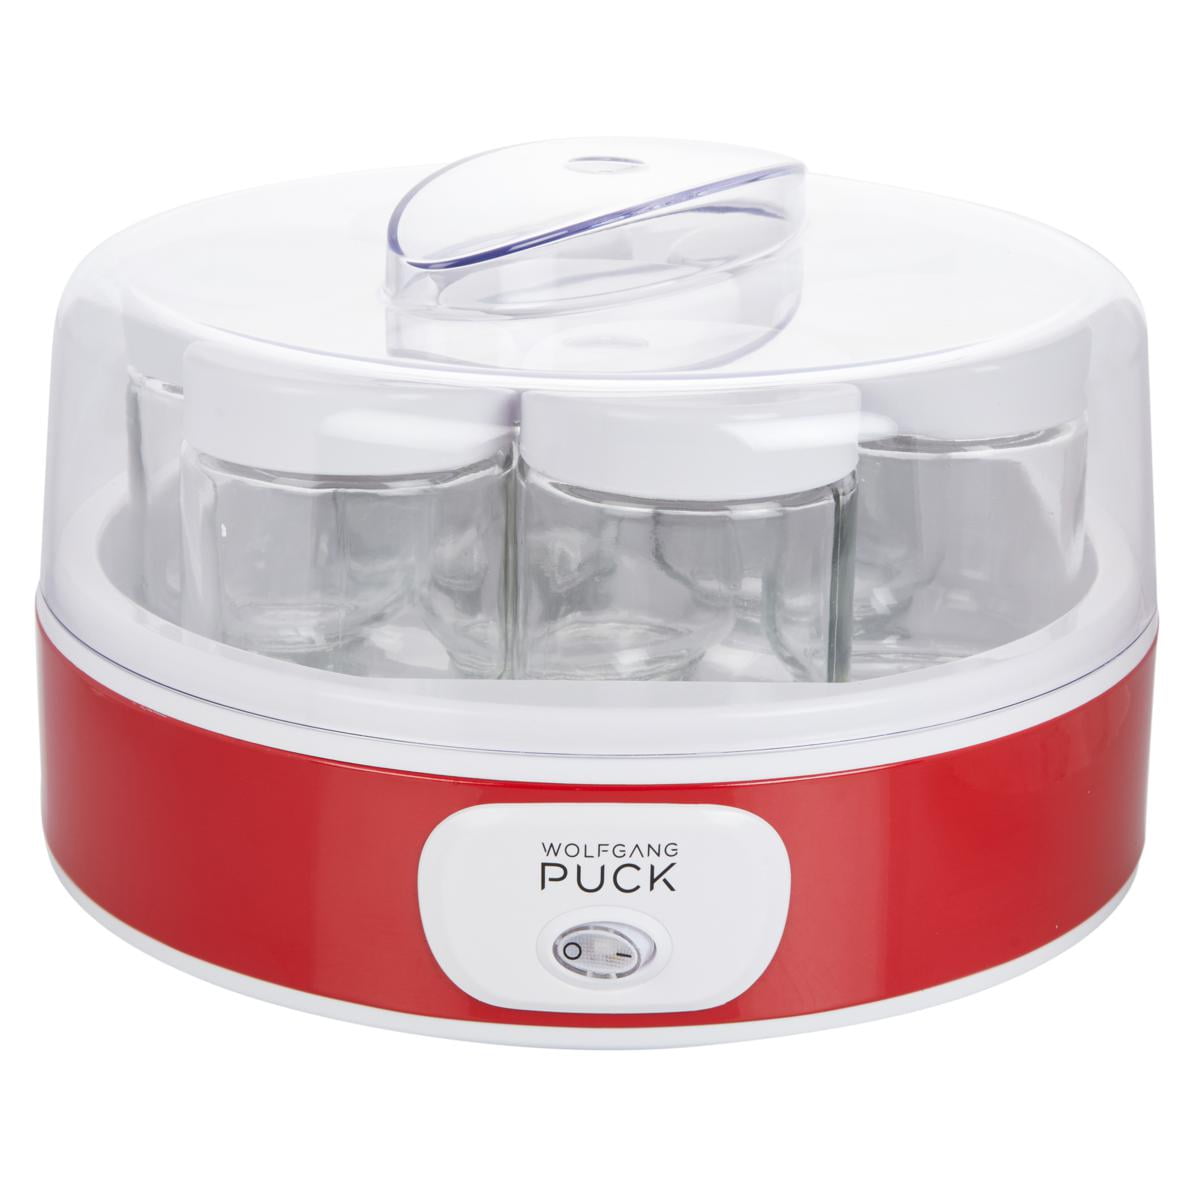 Wolfgang Puck Spice Mill Set with Base and Adjustable Grind - Red